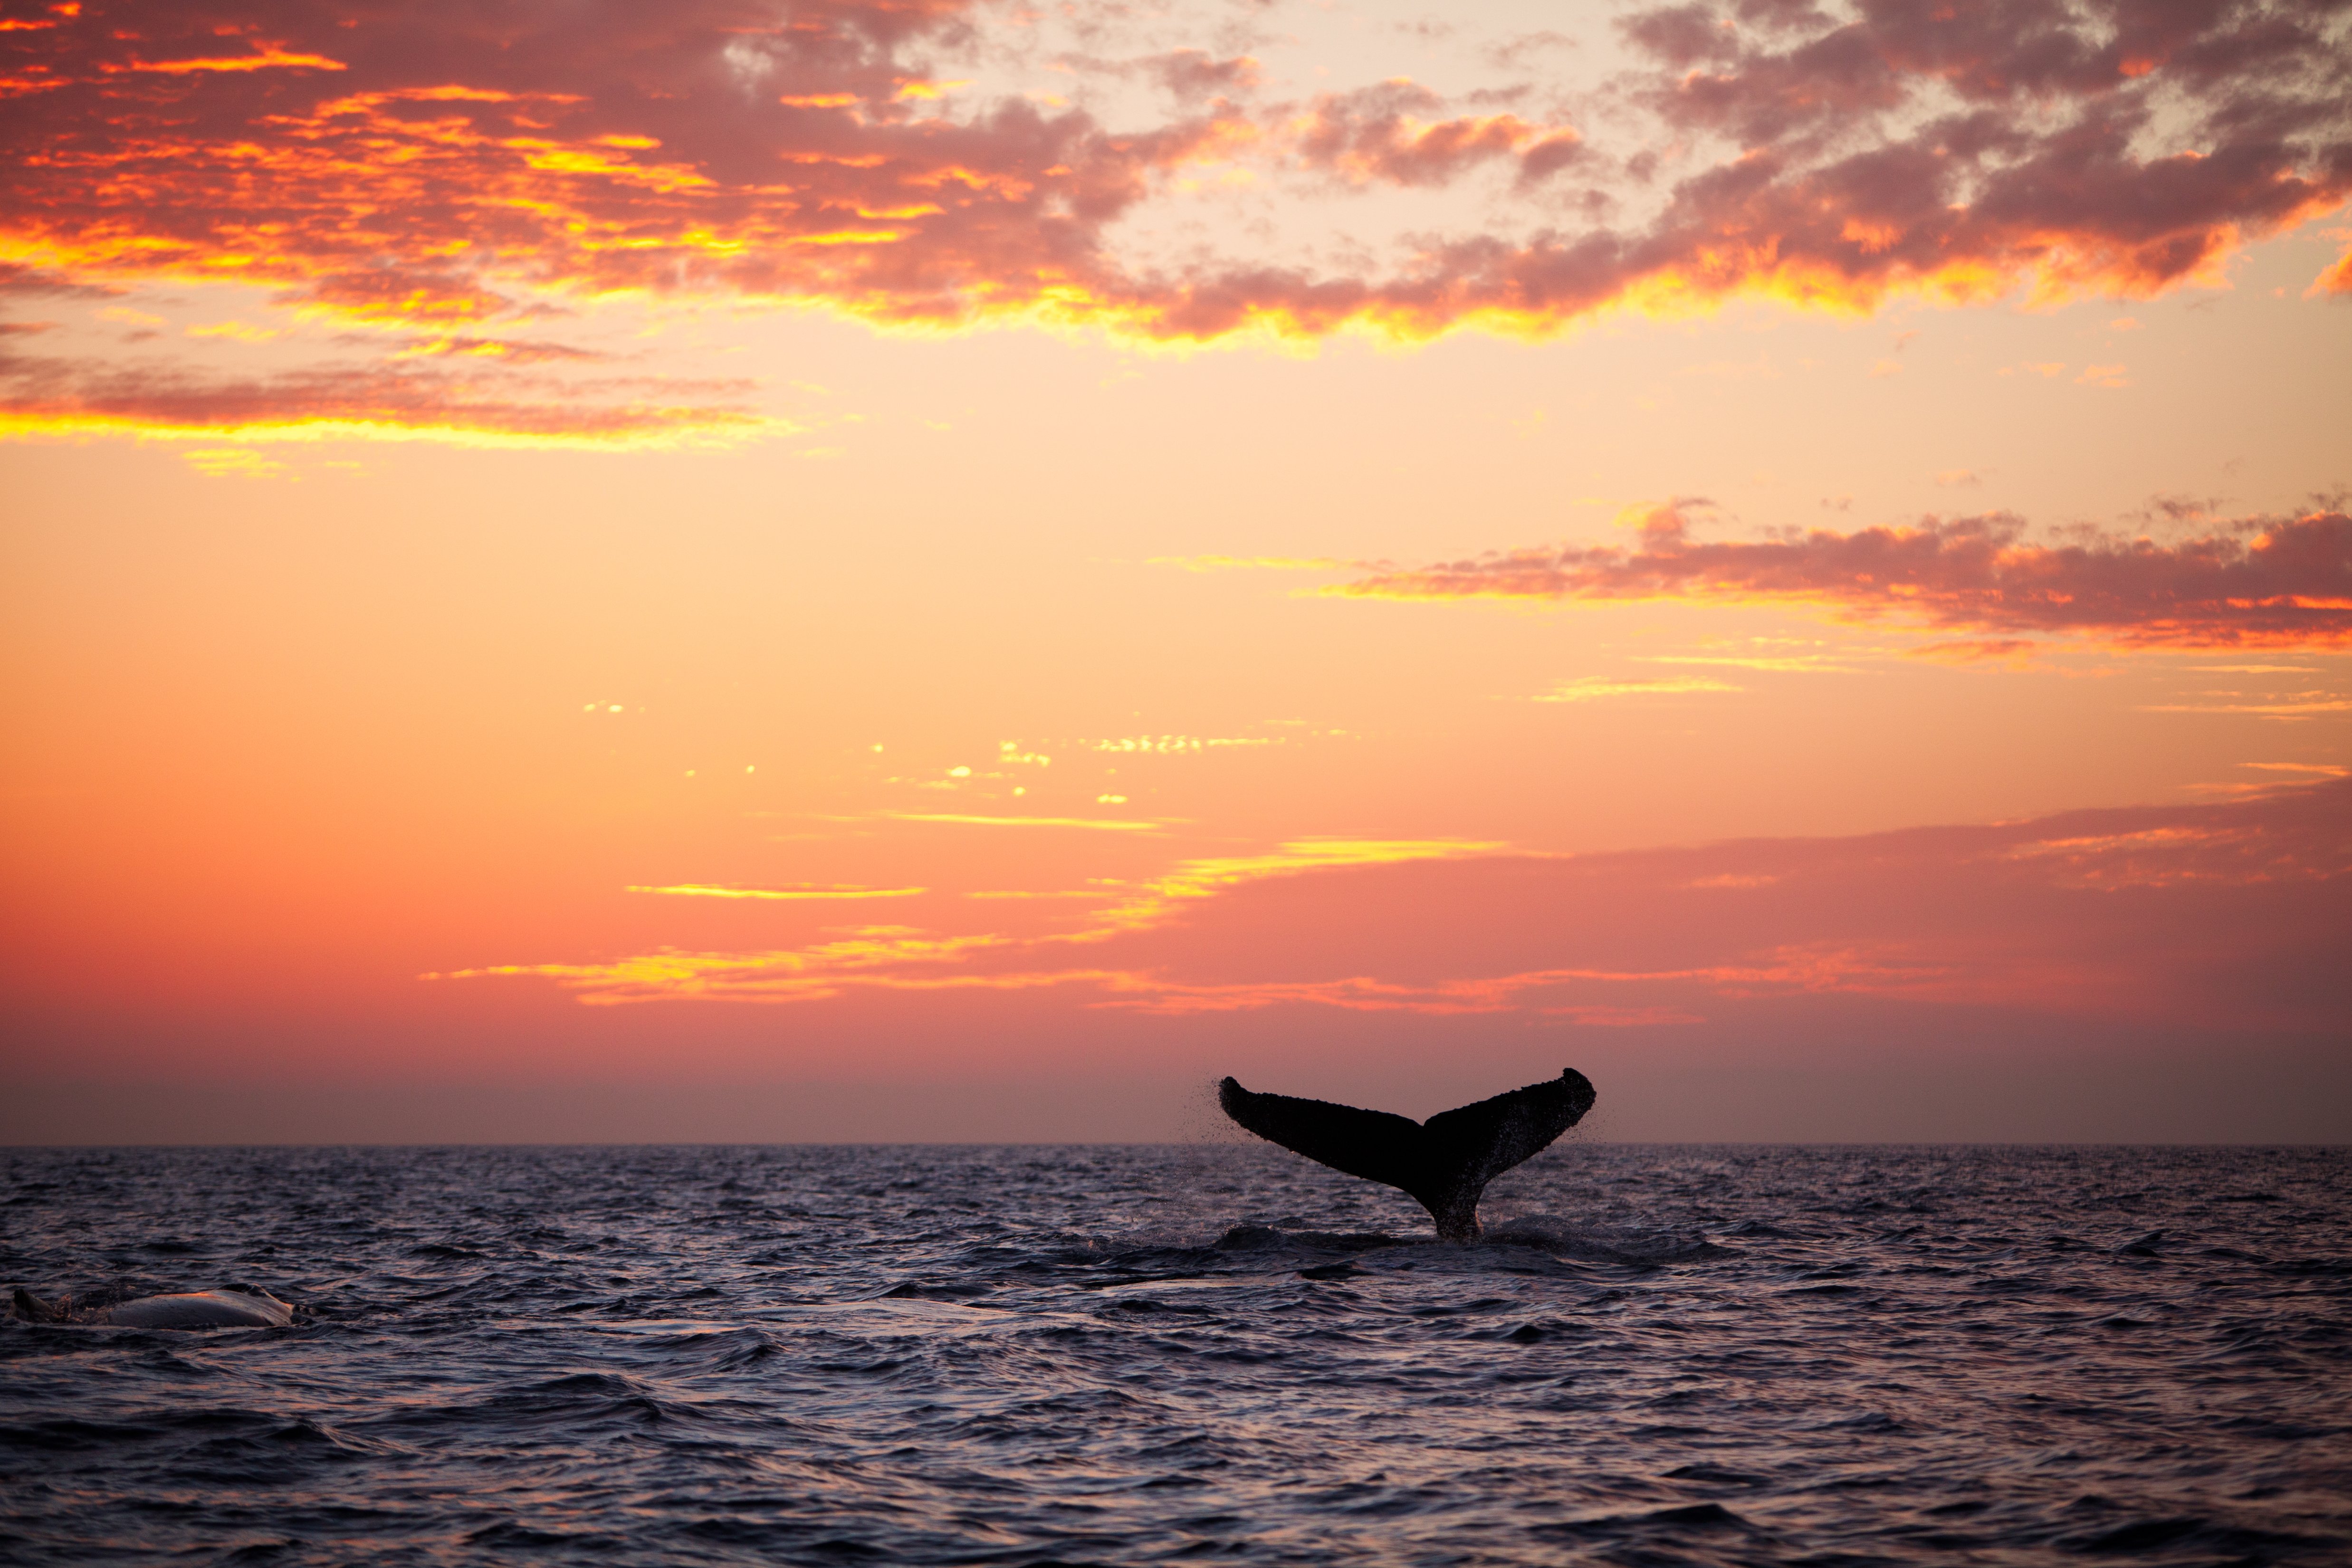 Whale sighting at sunset